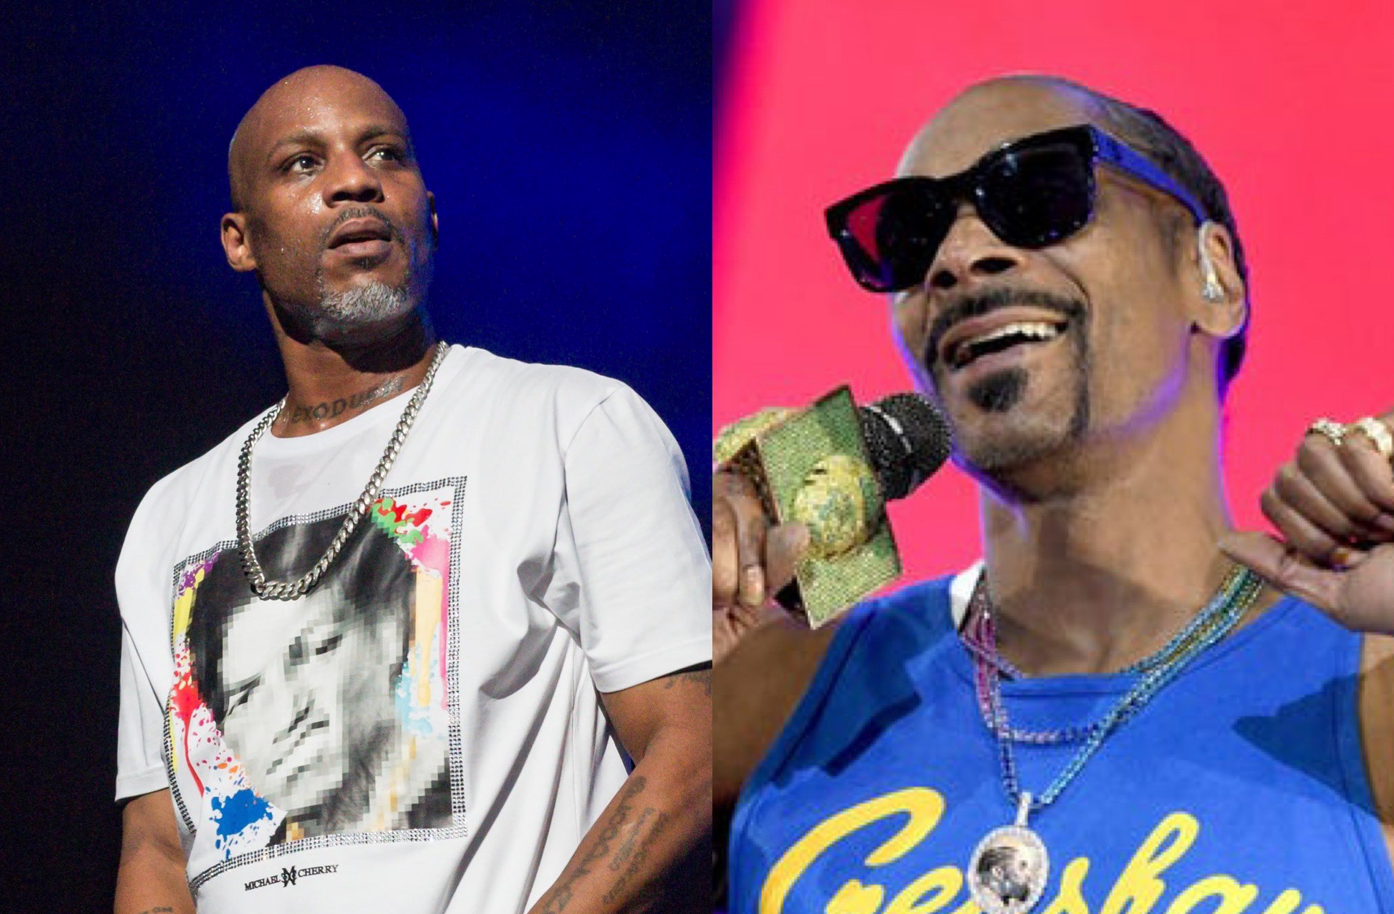 Who Let the Dogs Out: DMX and Snoop Dogg to Participate in Verzuz Battle Next Week